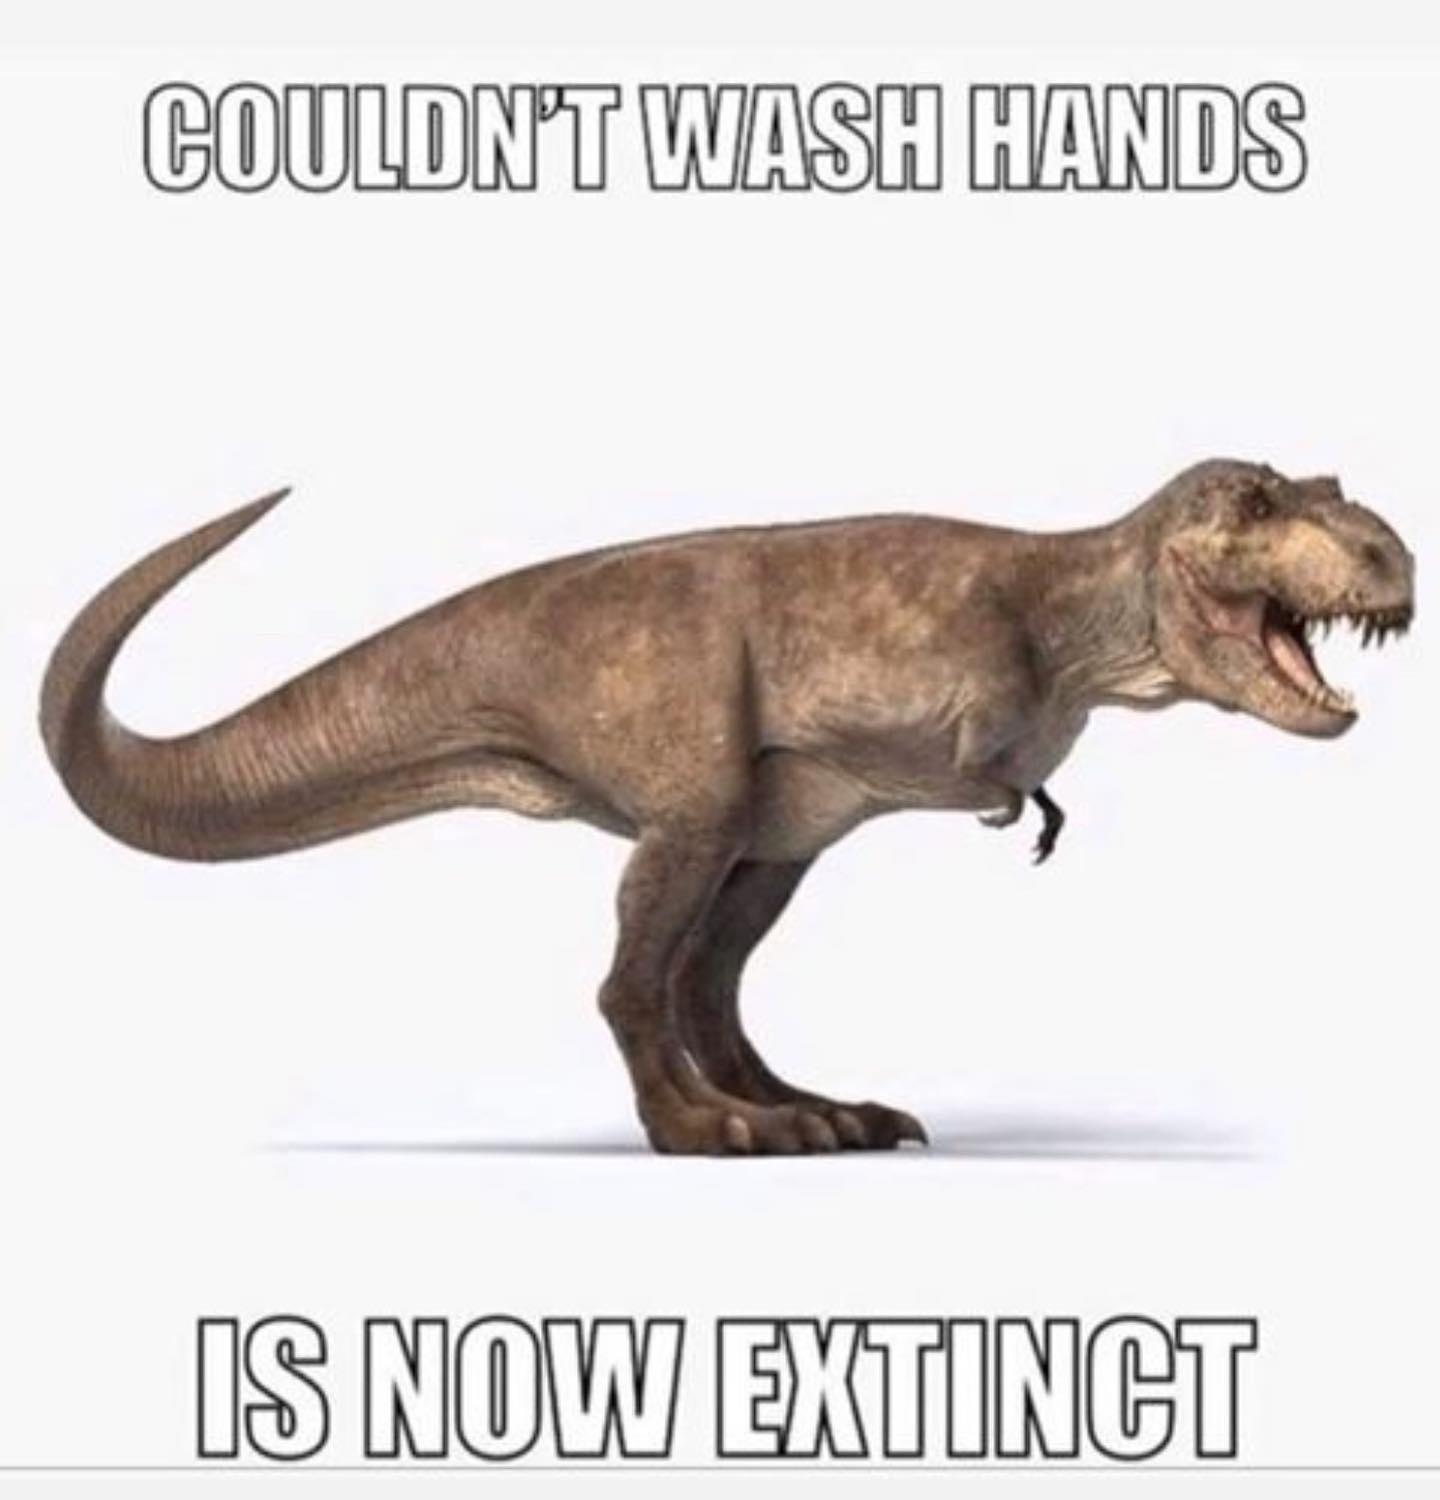 Reminder to wash your hands